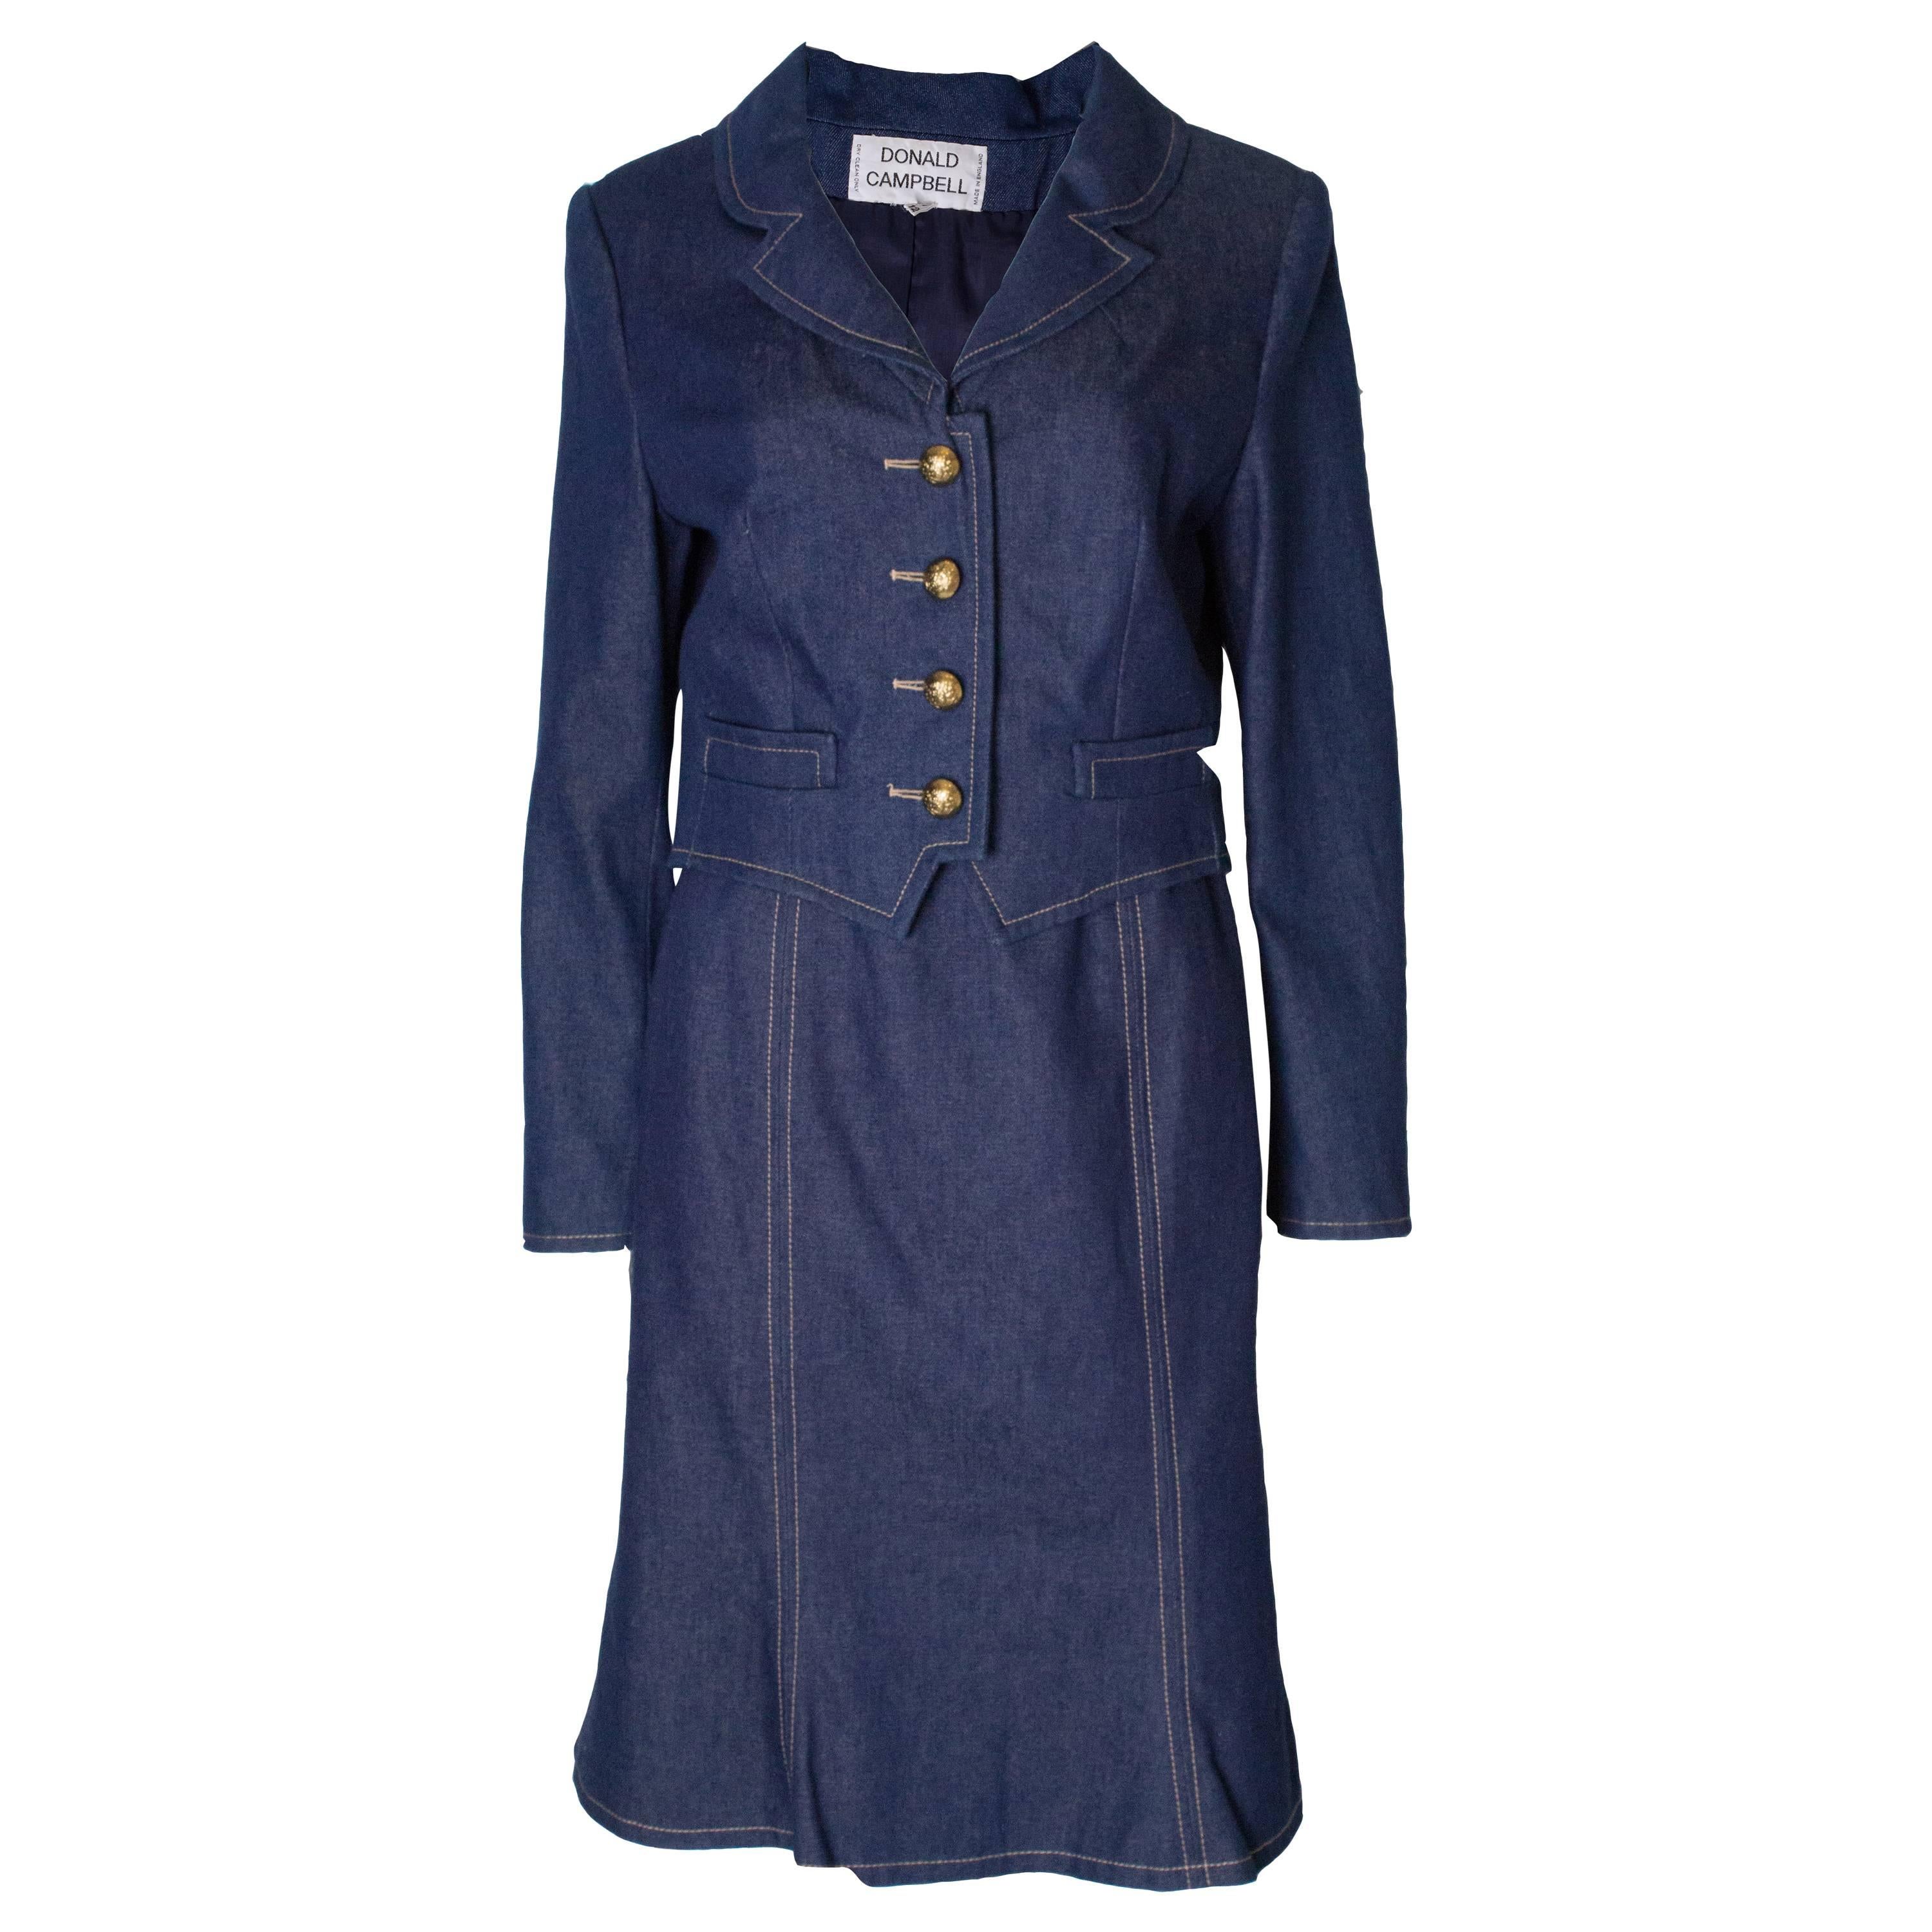 A Vintage 1980s denim Donald Campbell two piece Suit with a skirt and jacket For Sale